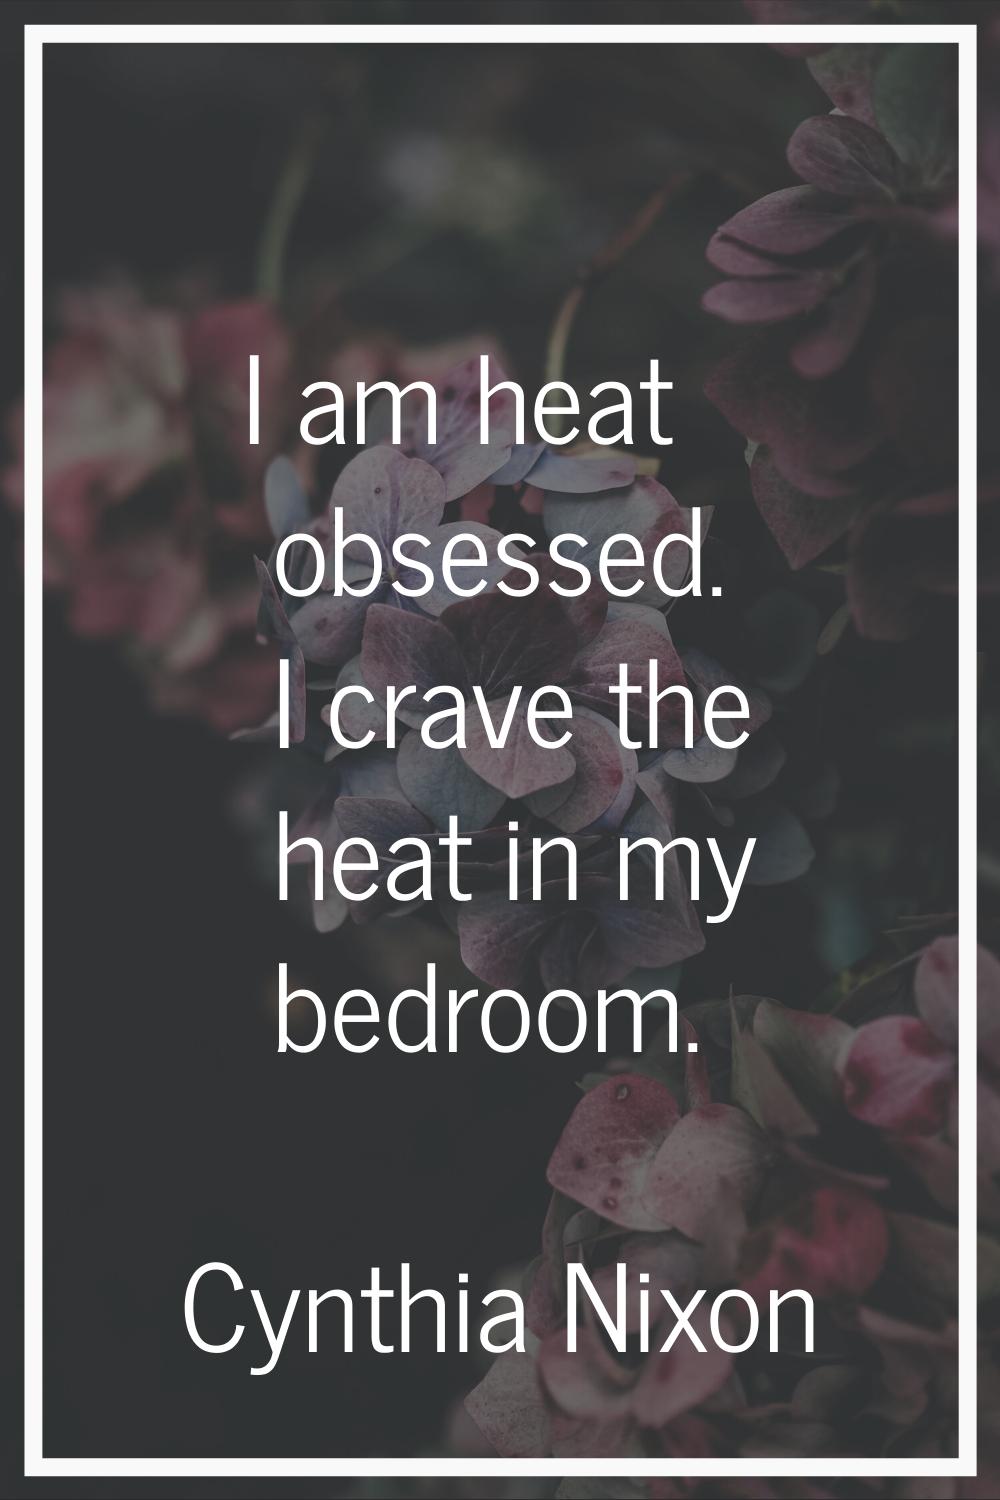 I am heat obsessed. I crave the heat in my bedroom.